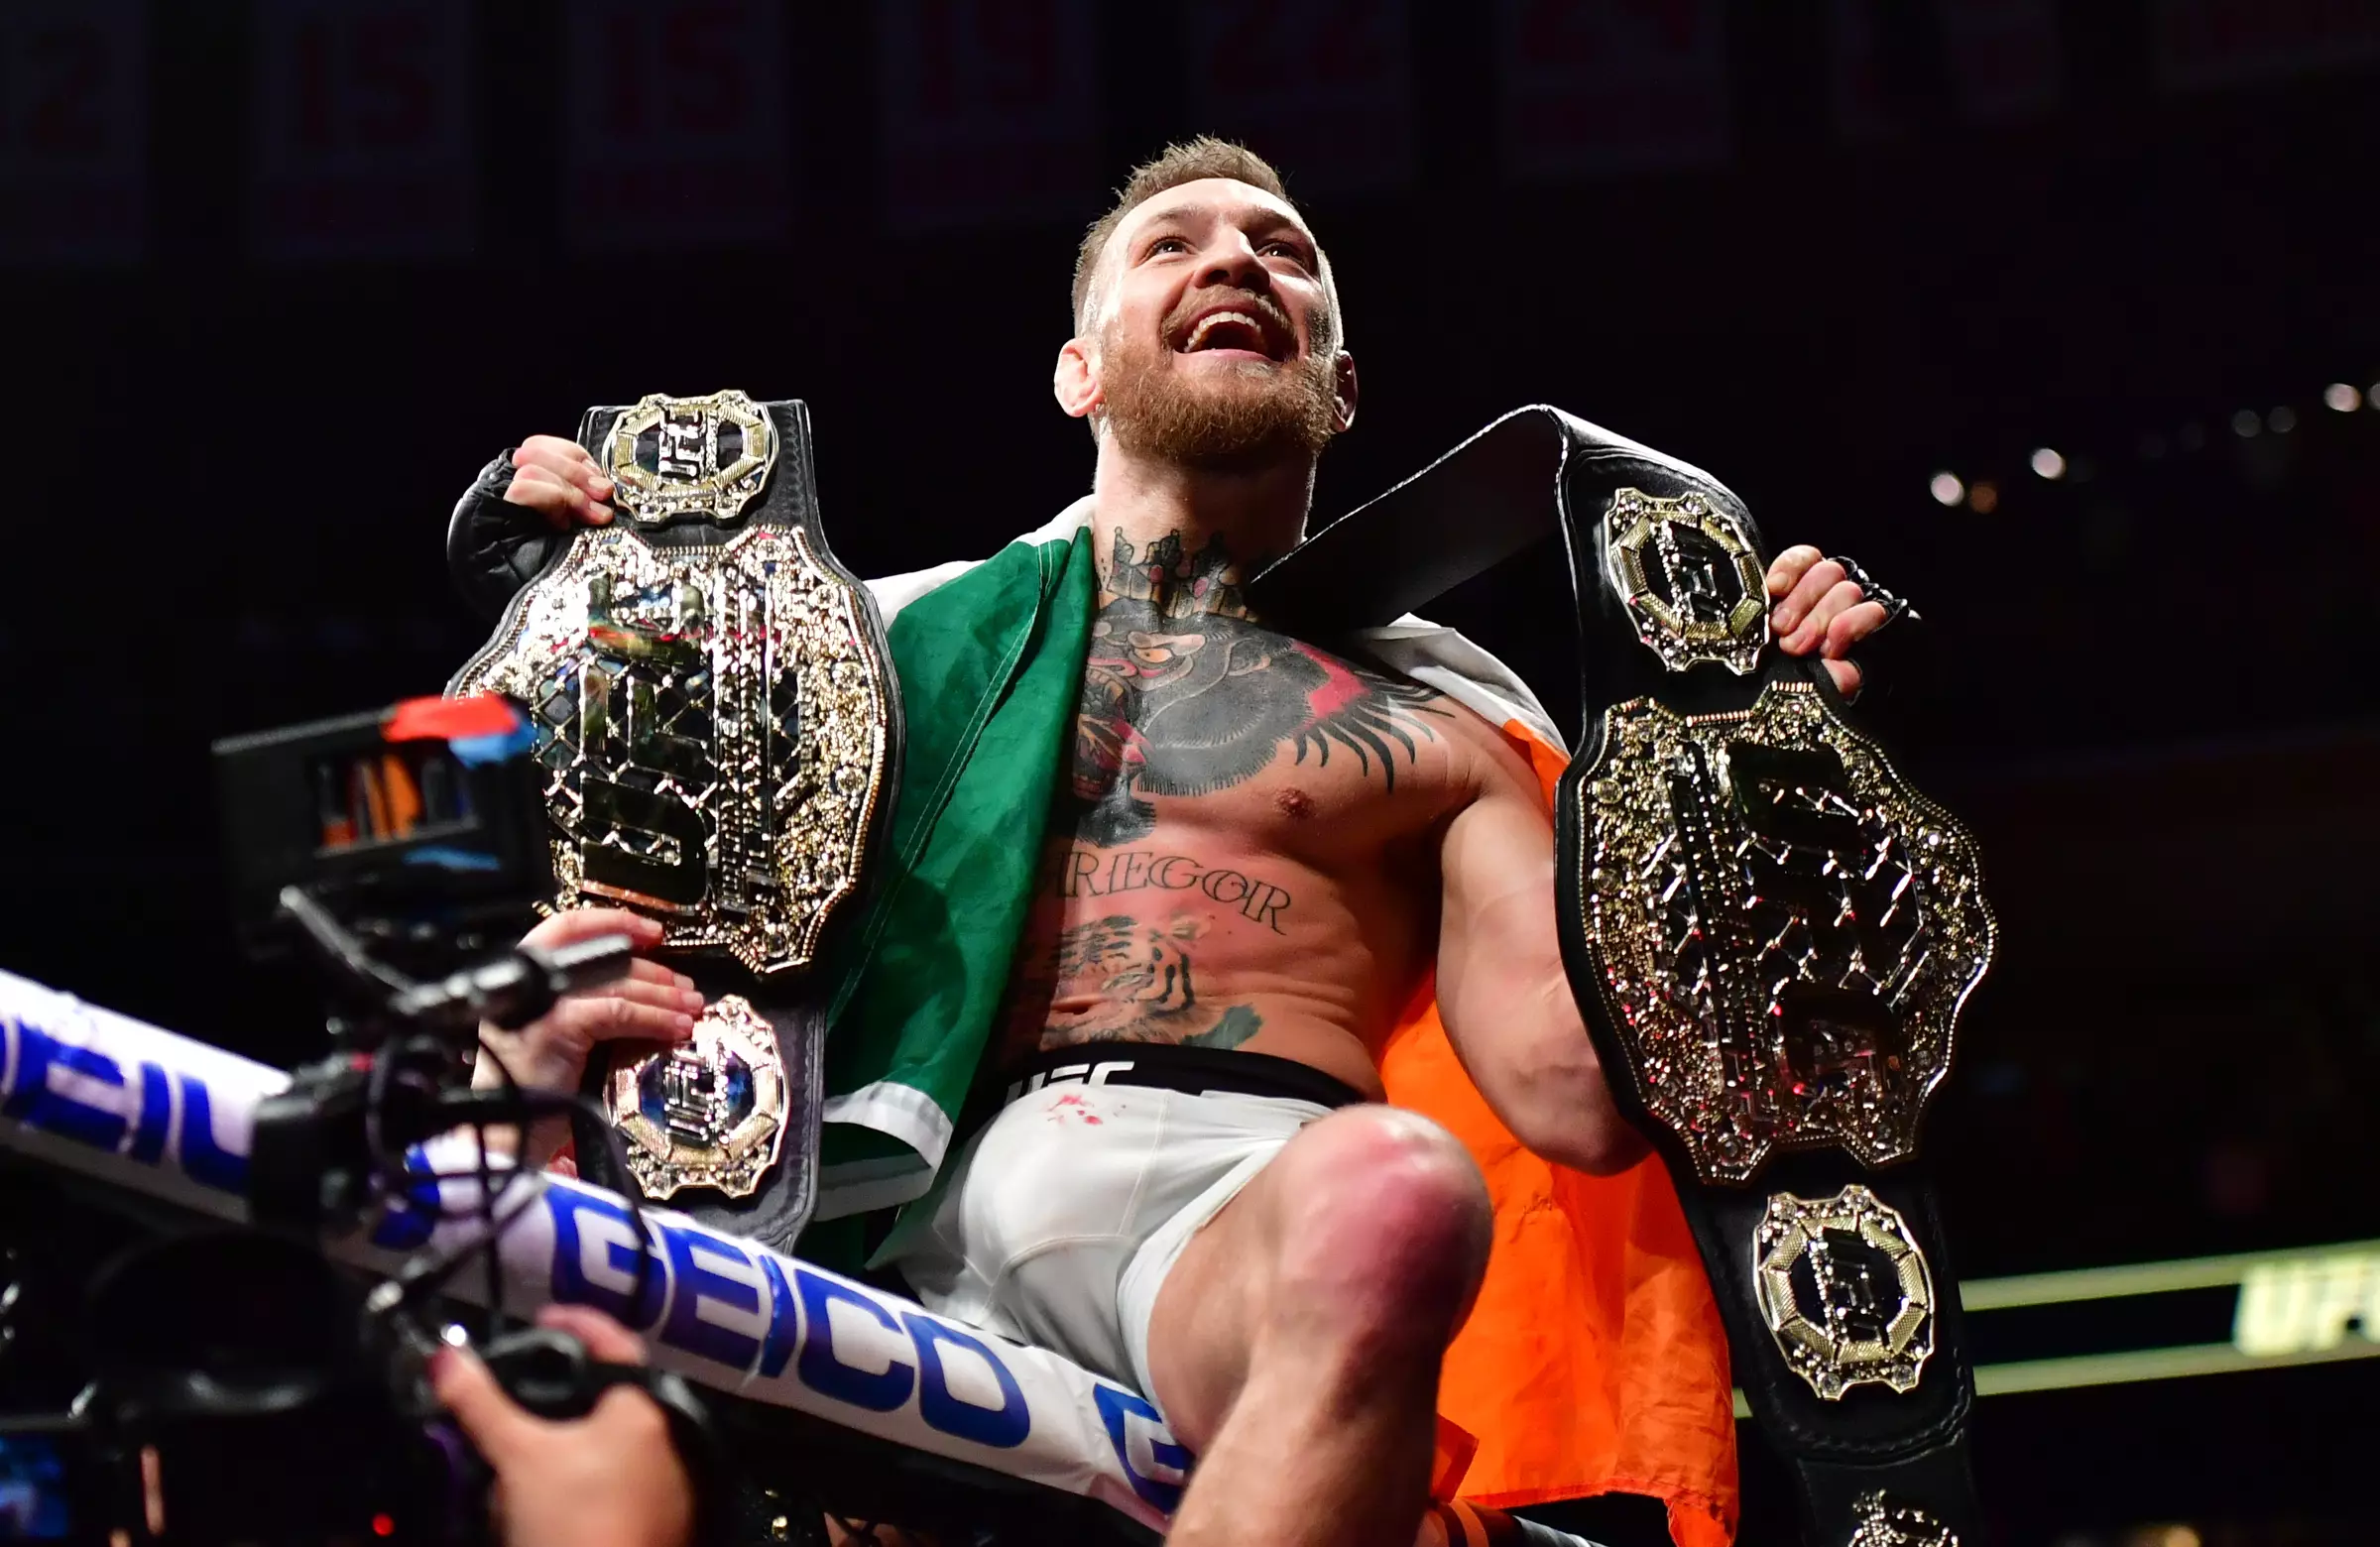 McGregor went on to become the first fighter to hold two UFC belts simultaneously.